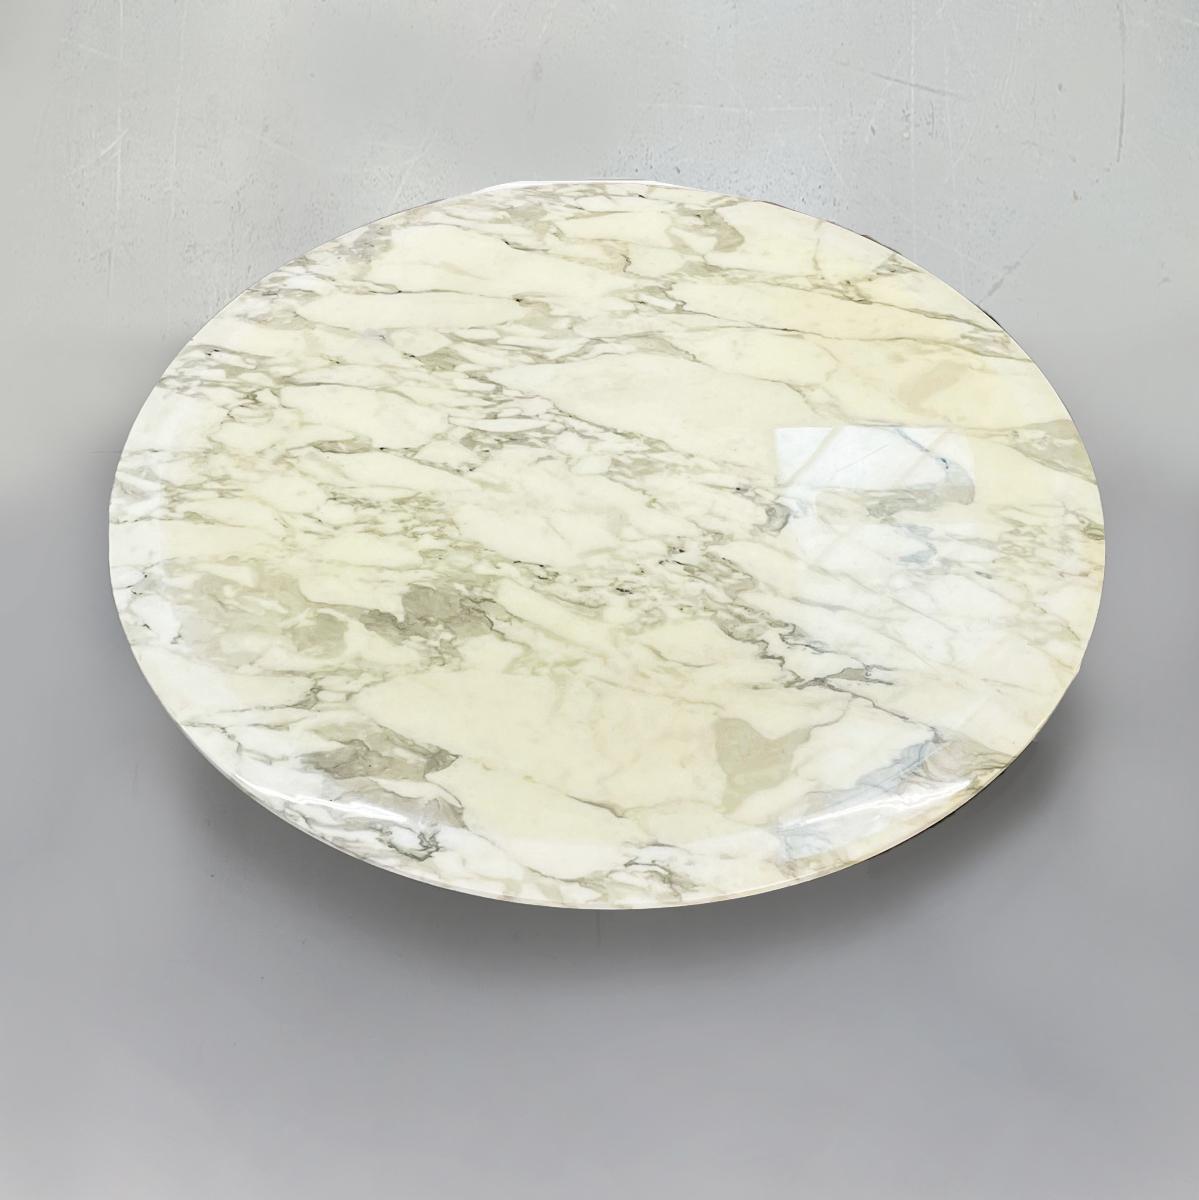 Italian mid-century marble table by Frigerio for Frigerio Arredamenti Desio, 1970s
Marble table with round top in cream colored marble in the center and white on the edges. The round base is in white marble, like the top.
Produced by Frigerio